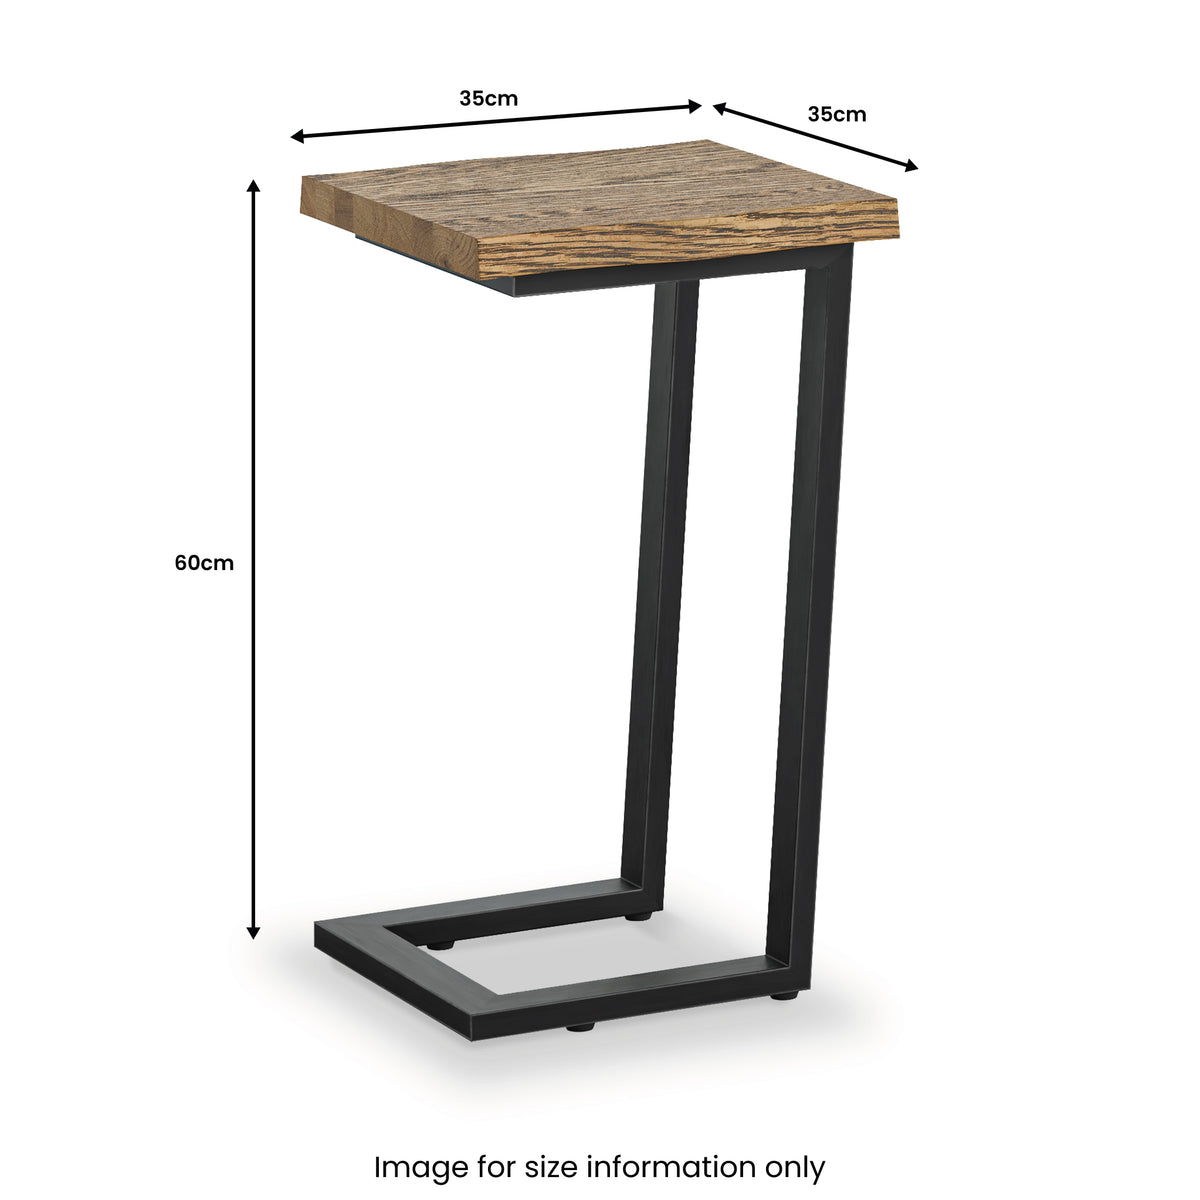 Isaac Oak Side Table dimensions